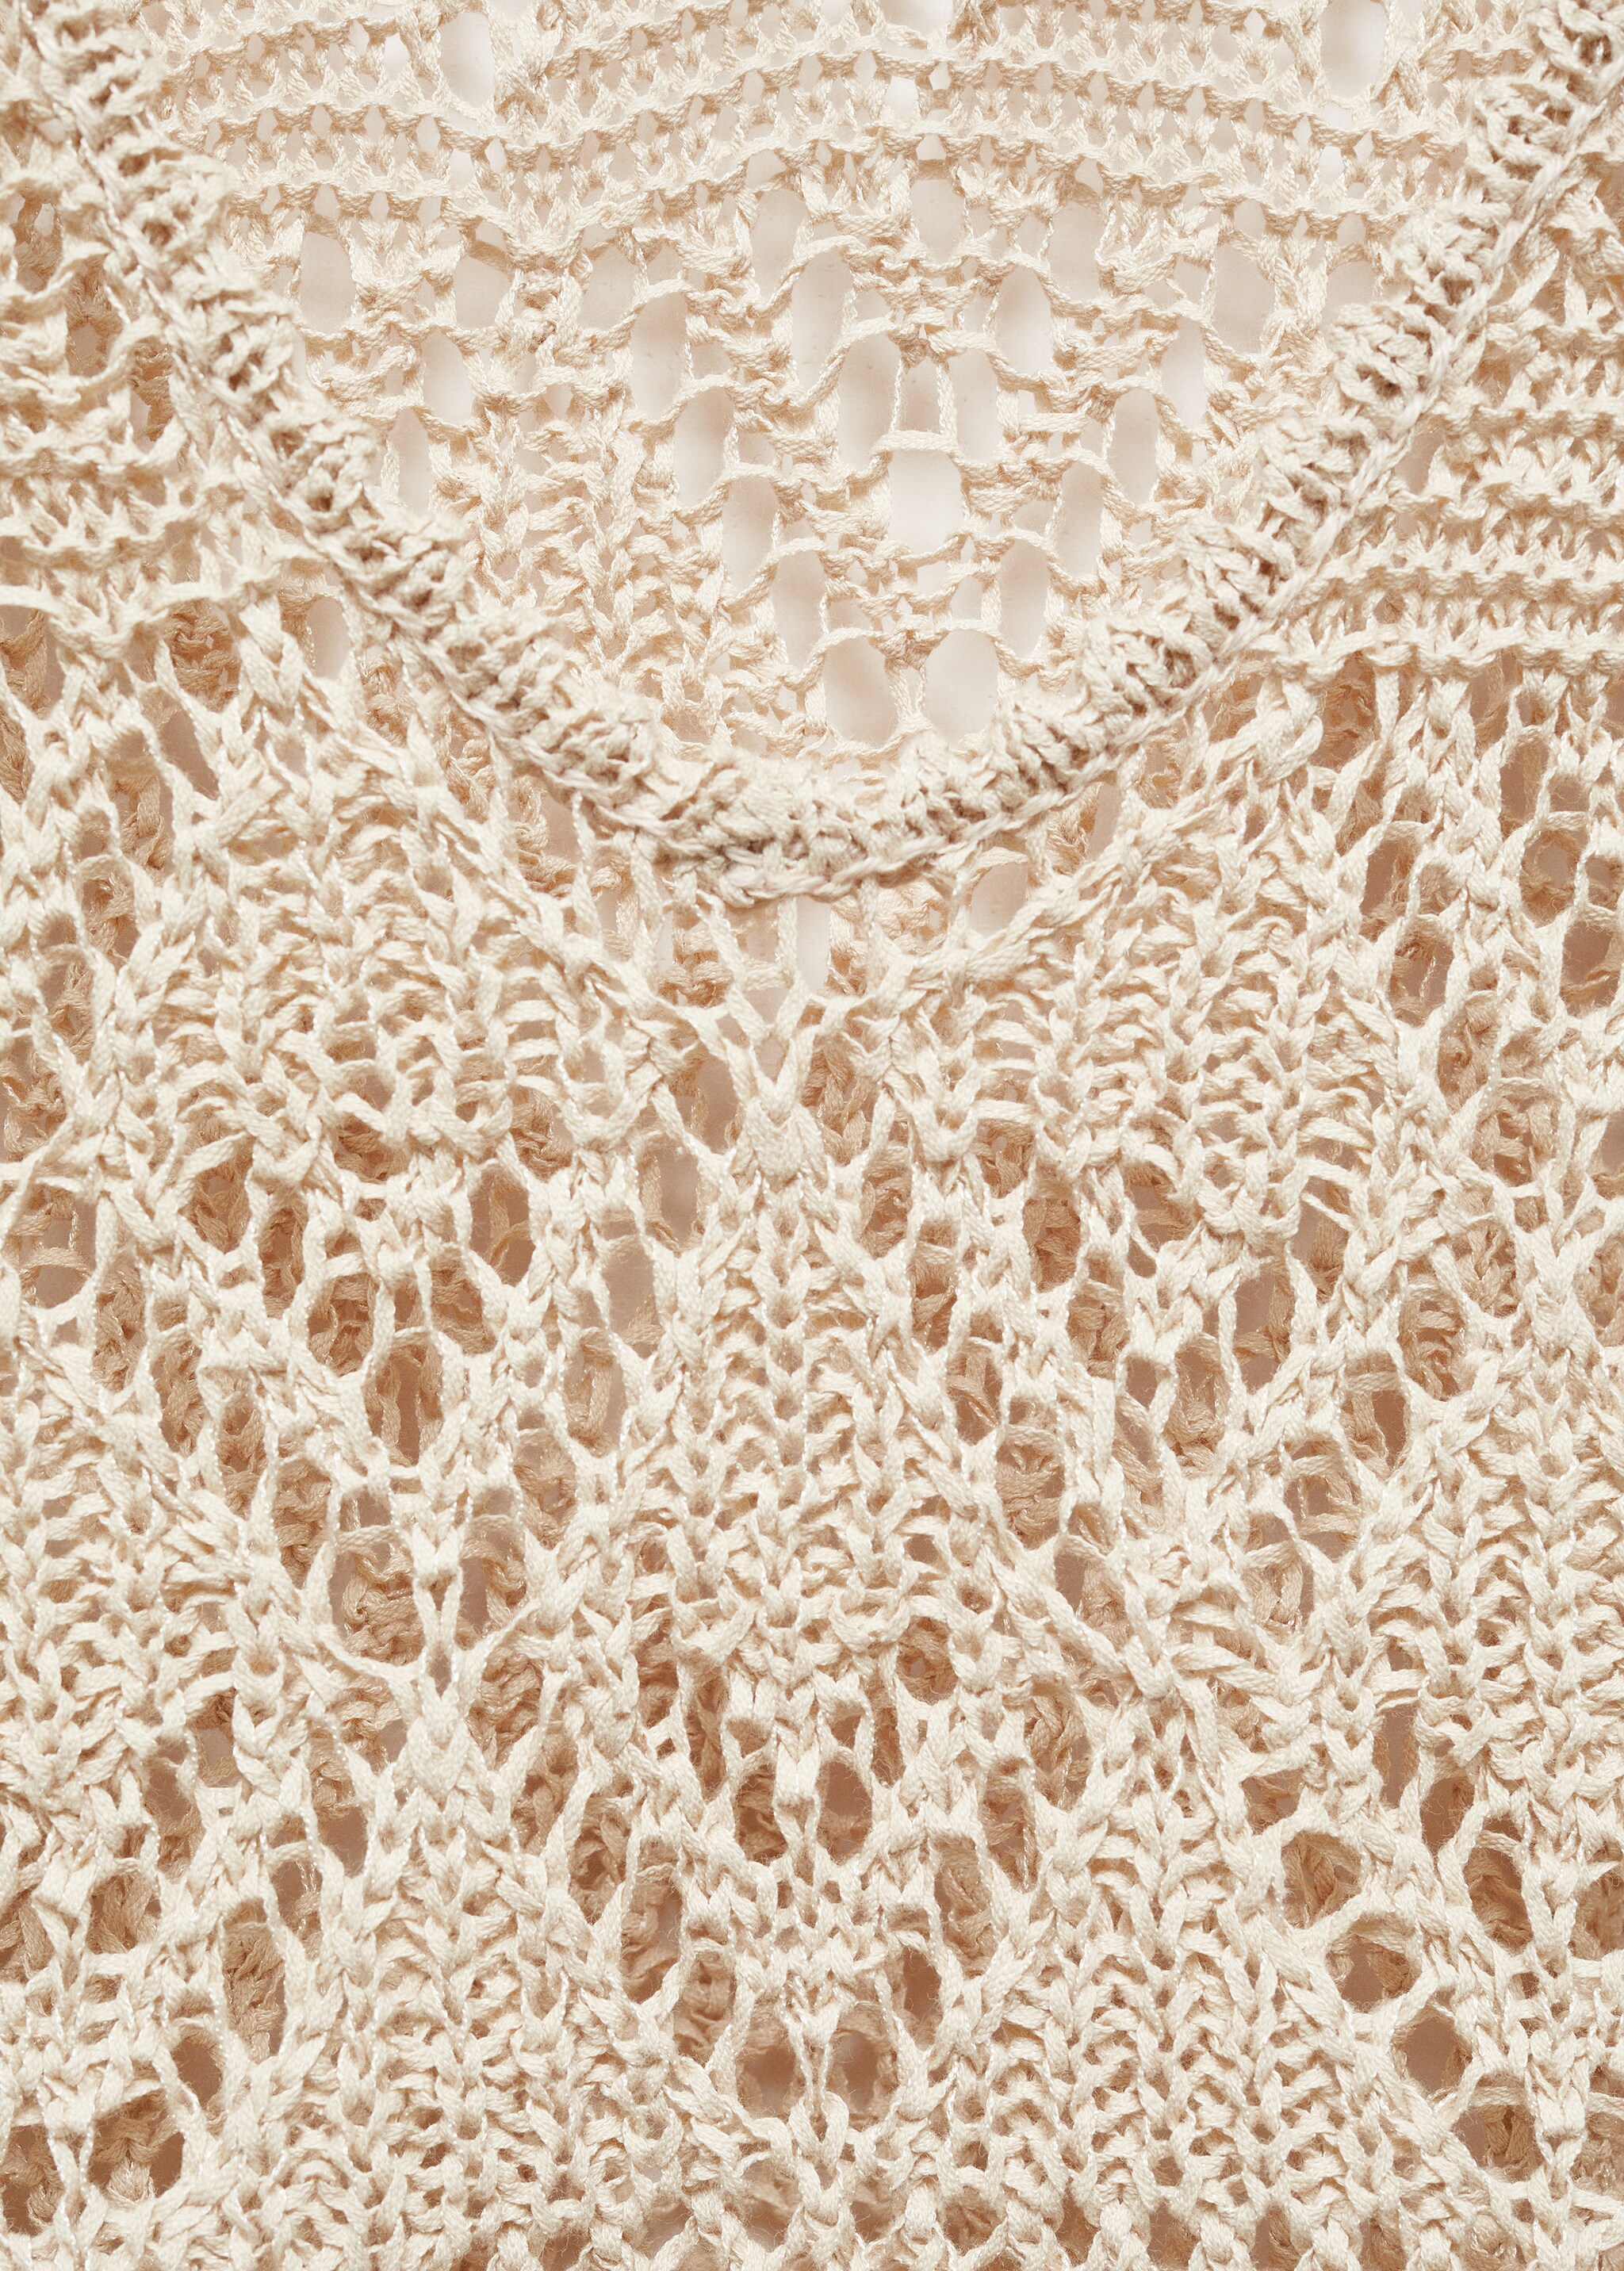 Openwork knit sweater - Details of the article 8